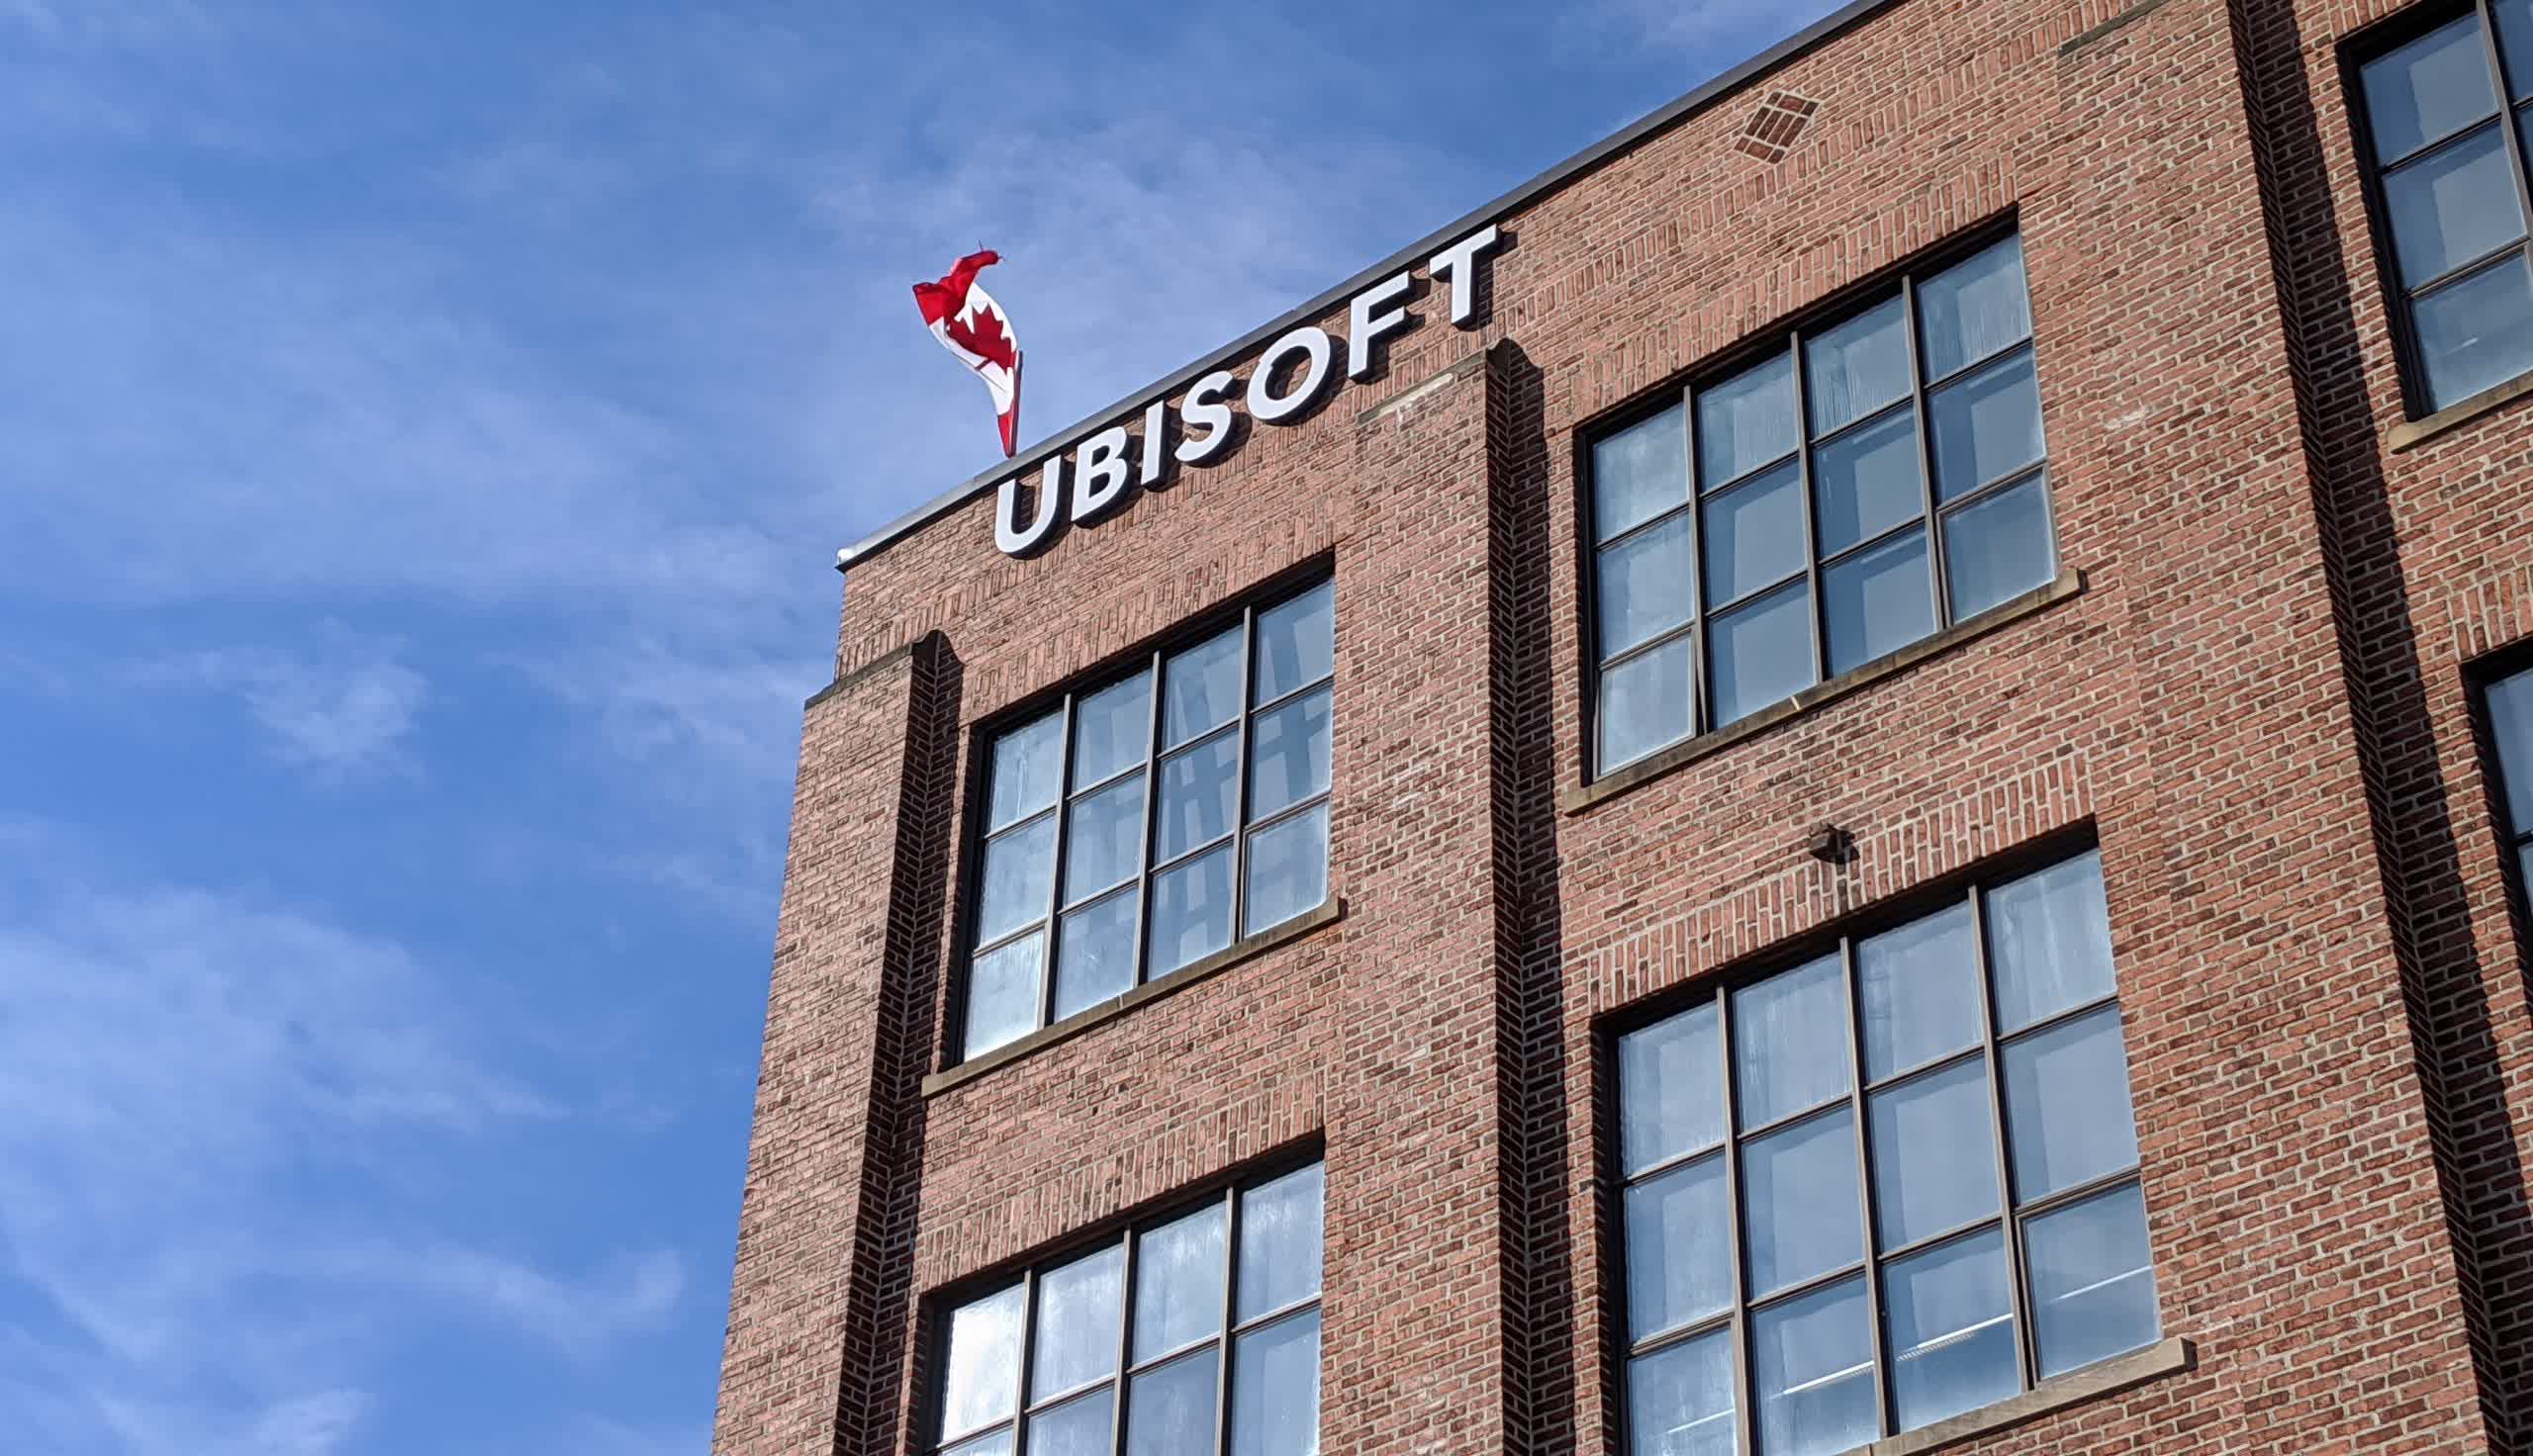 Ubisoft's Canadian studios are raising wages to retain employees